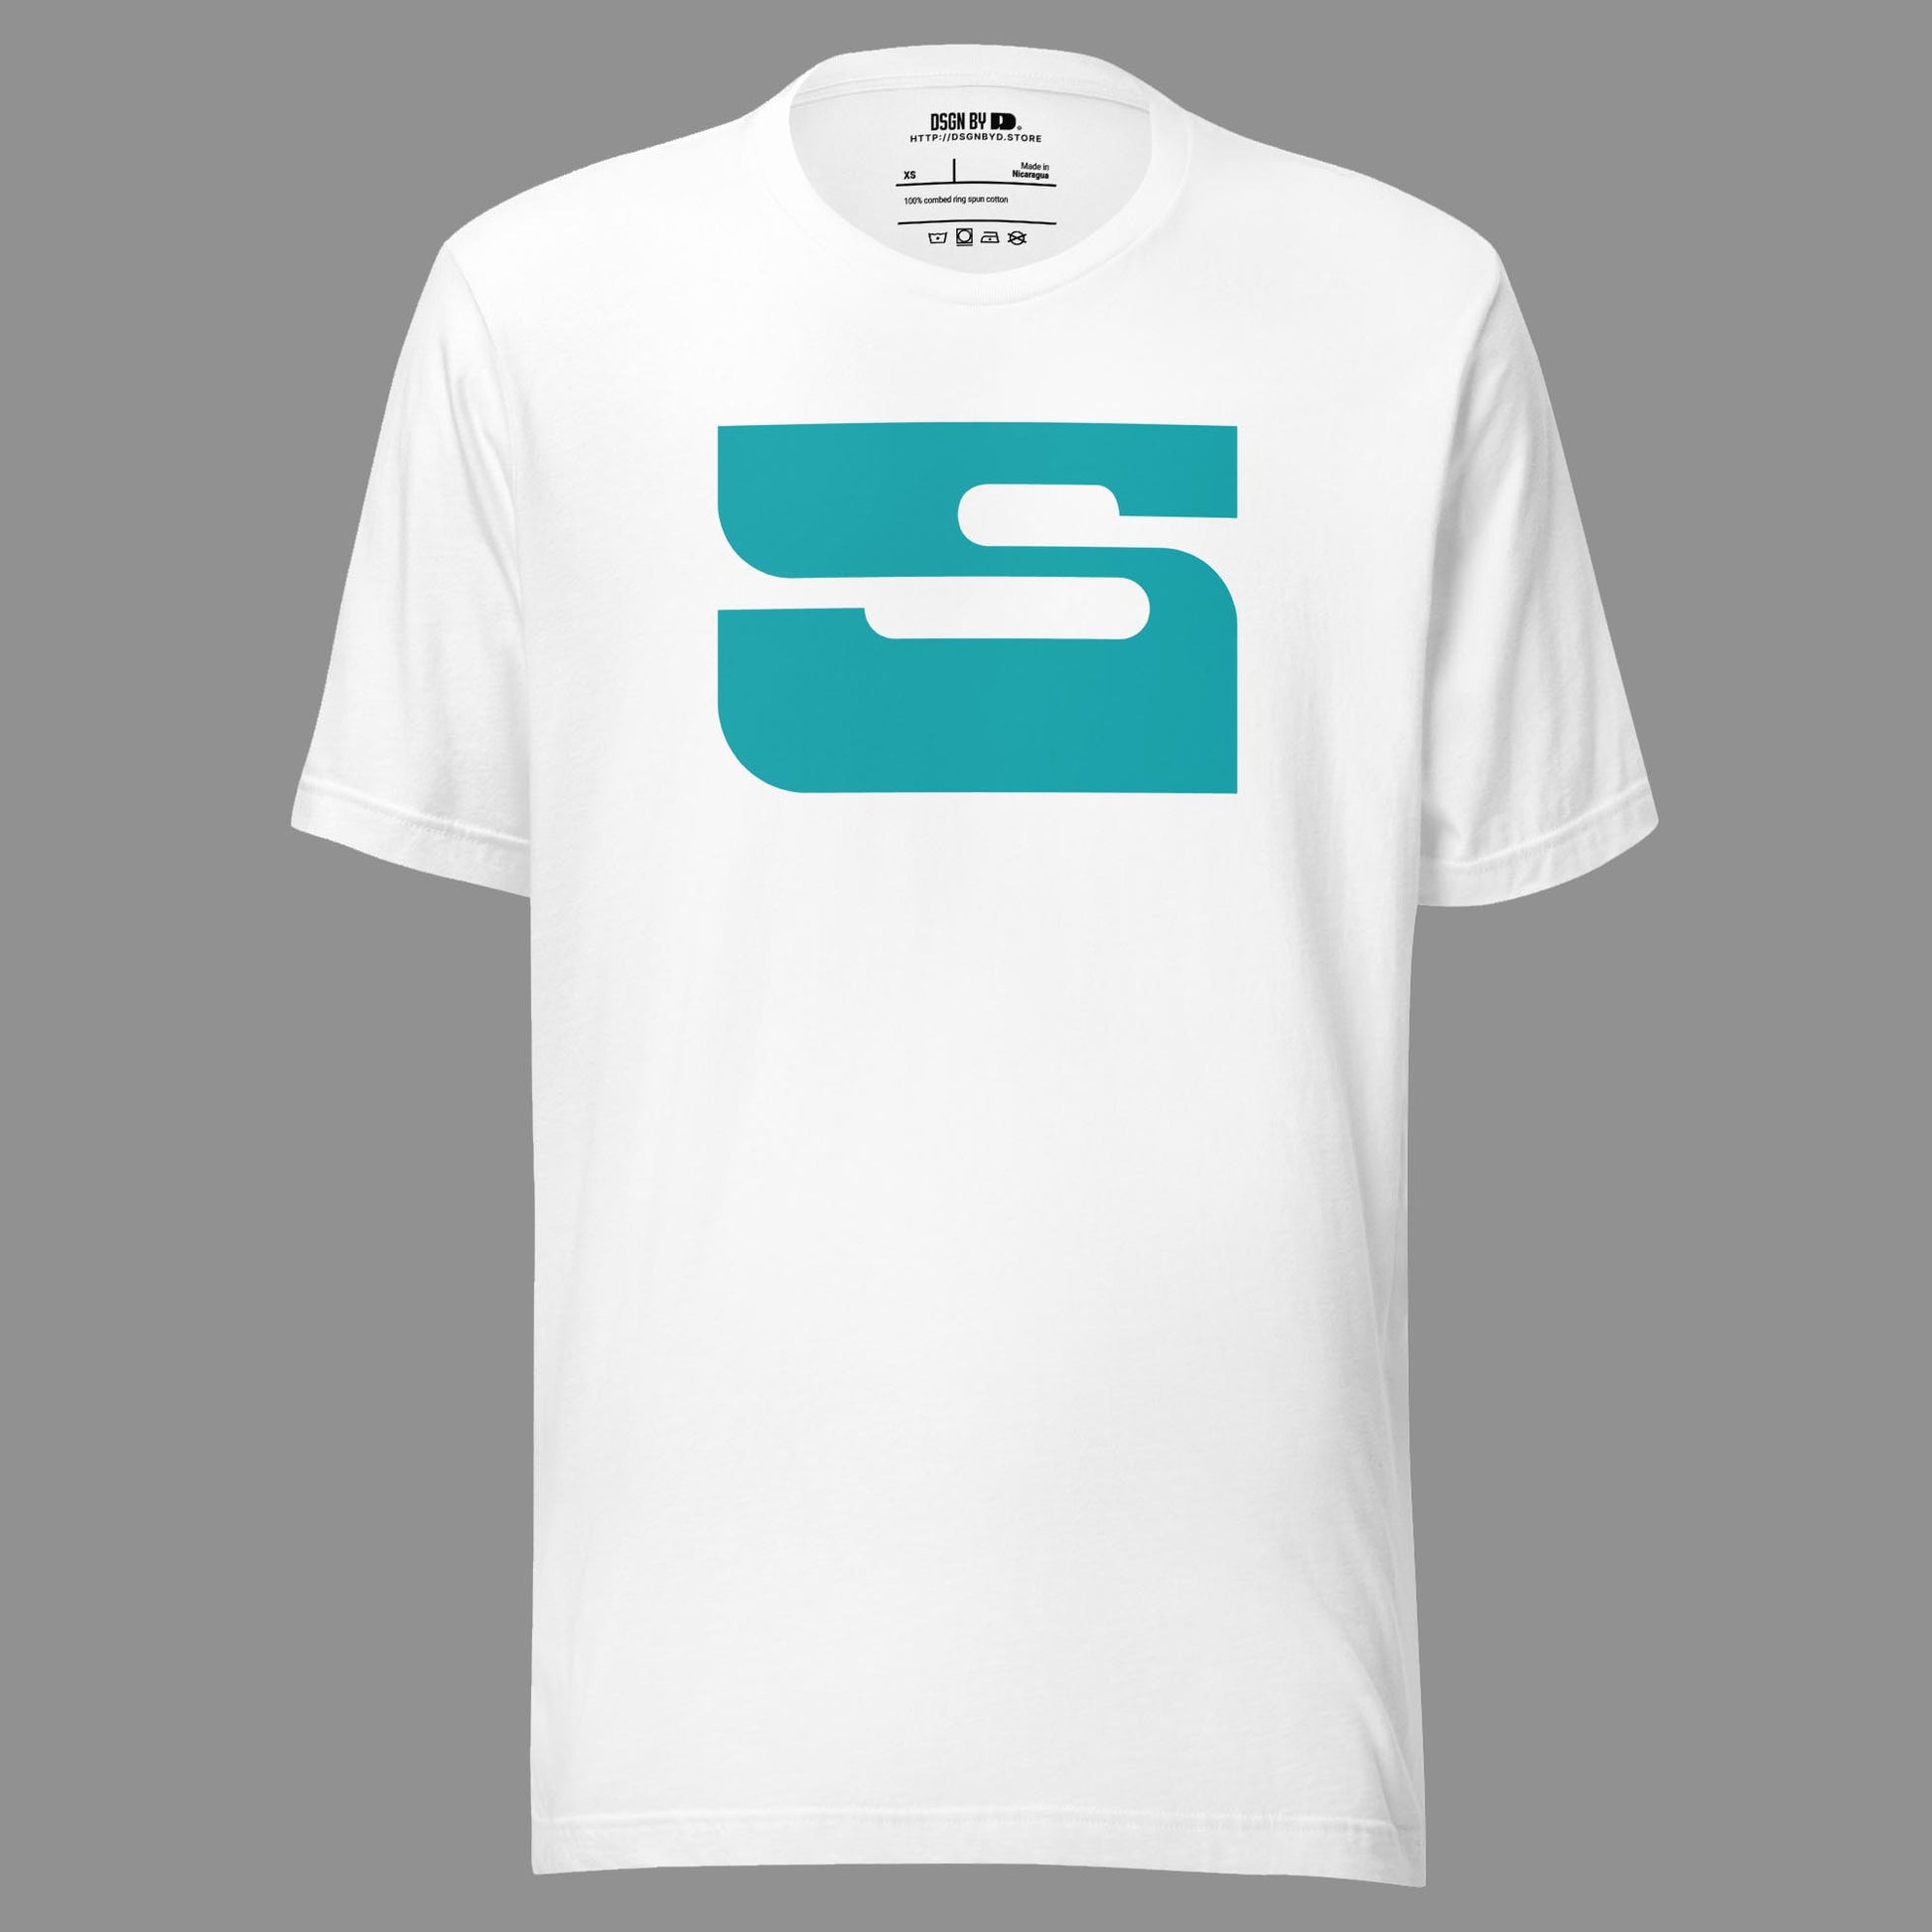 A white cotton unisex graphic tee with letter S.